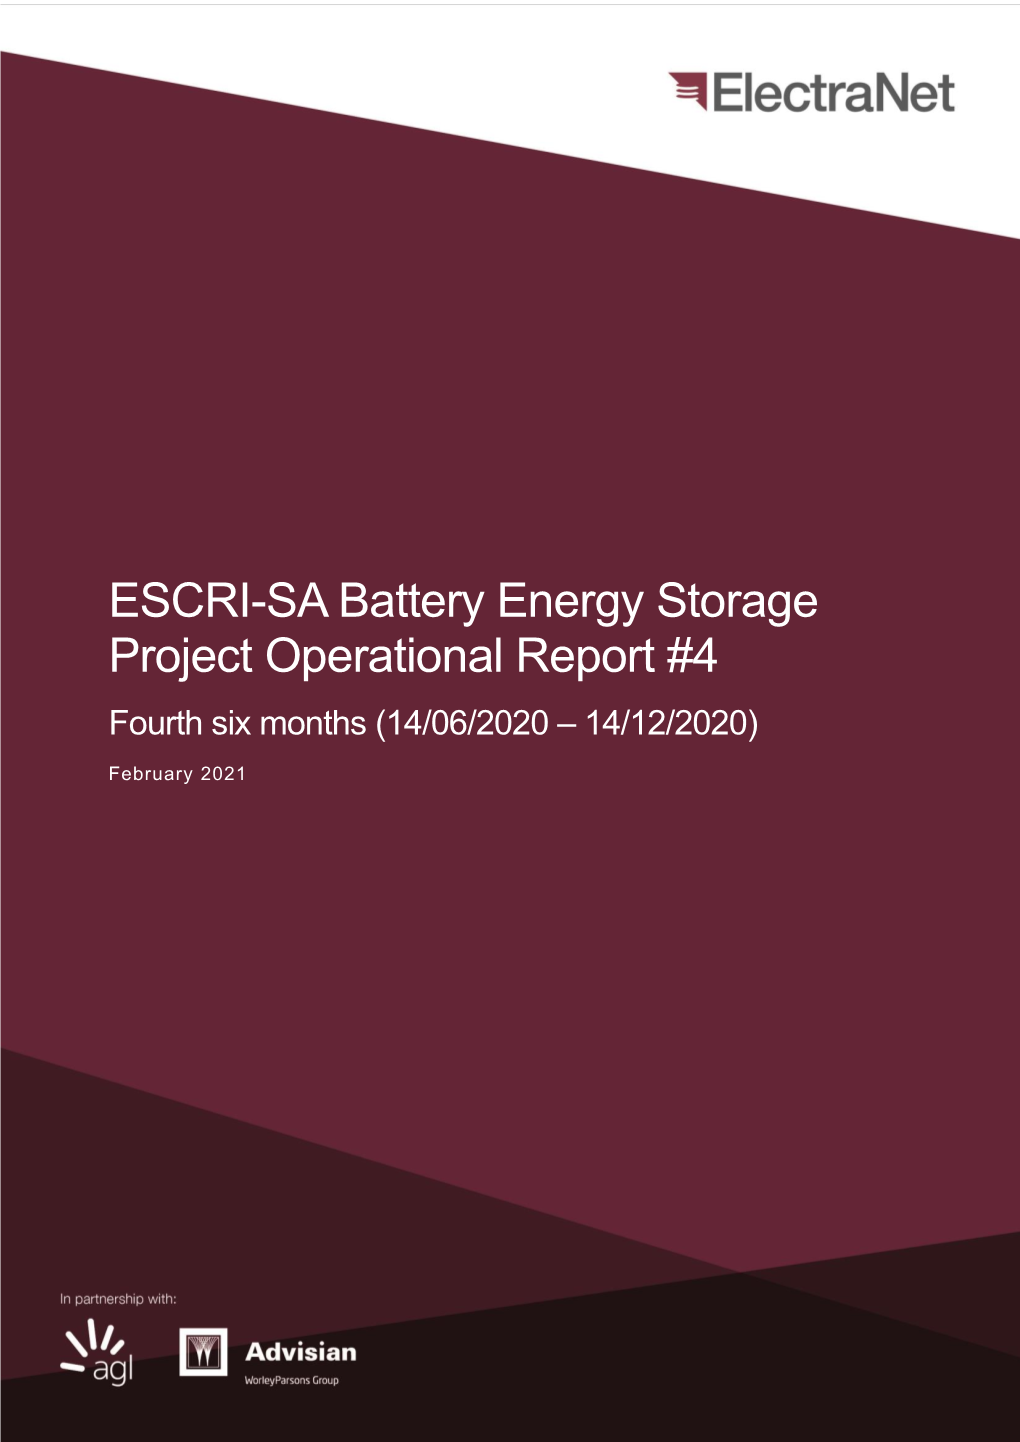 ESCRI-SA Battery Energy Storage Project Operational Report #4 Fourth Six Months (14/06/2020 – 14/12/2020)